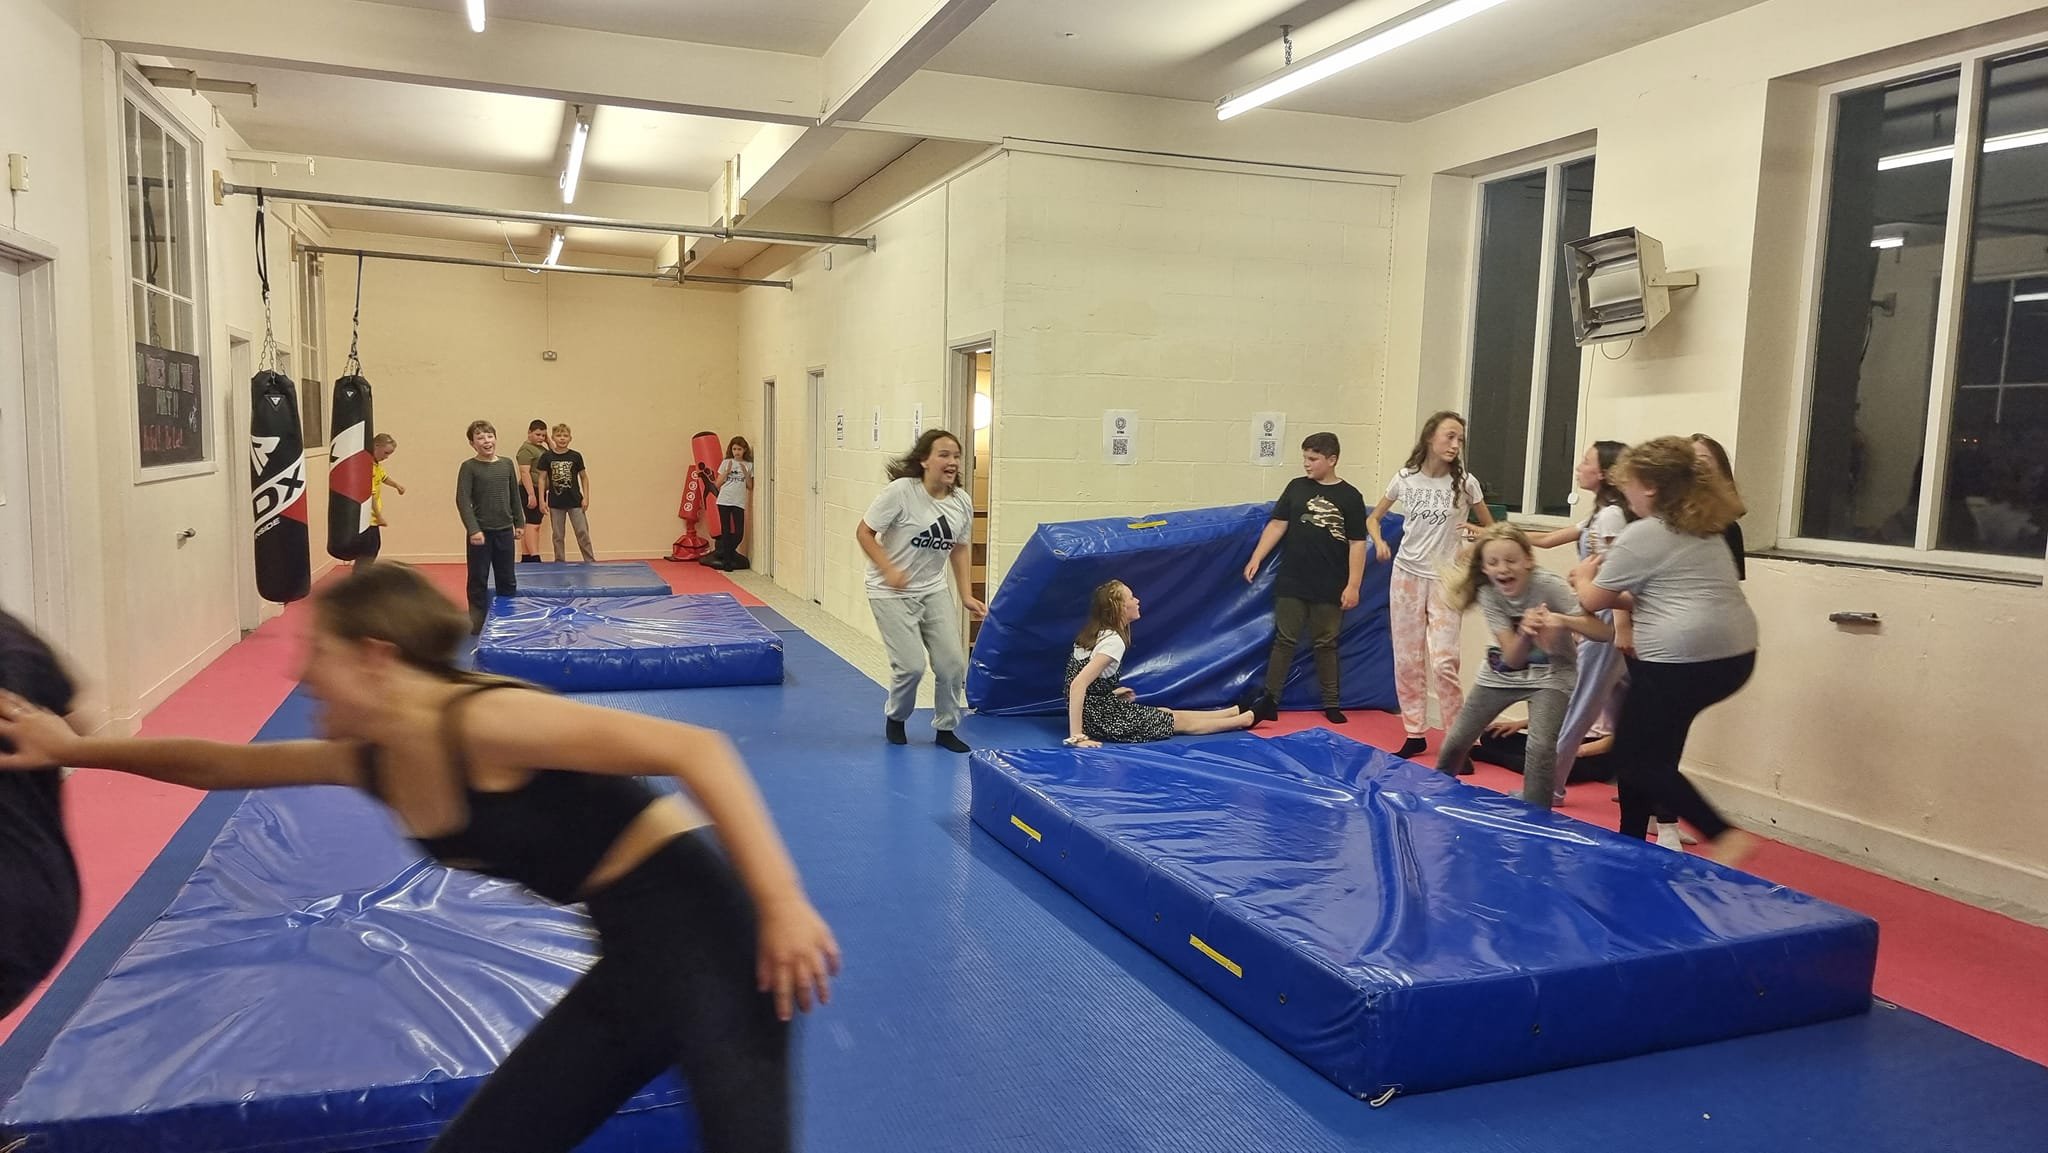 Great Yarmouth Martial Arts (GYMA) using their safety equipment for mixed martial arts, judo, and self-defence classes.